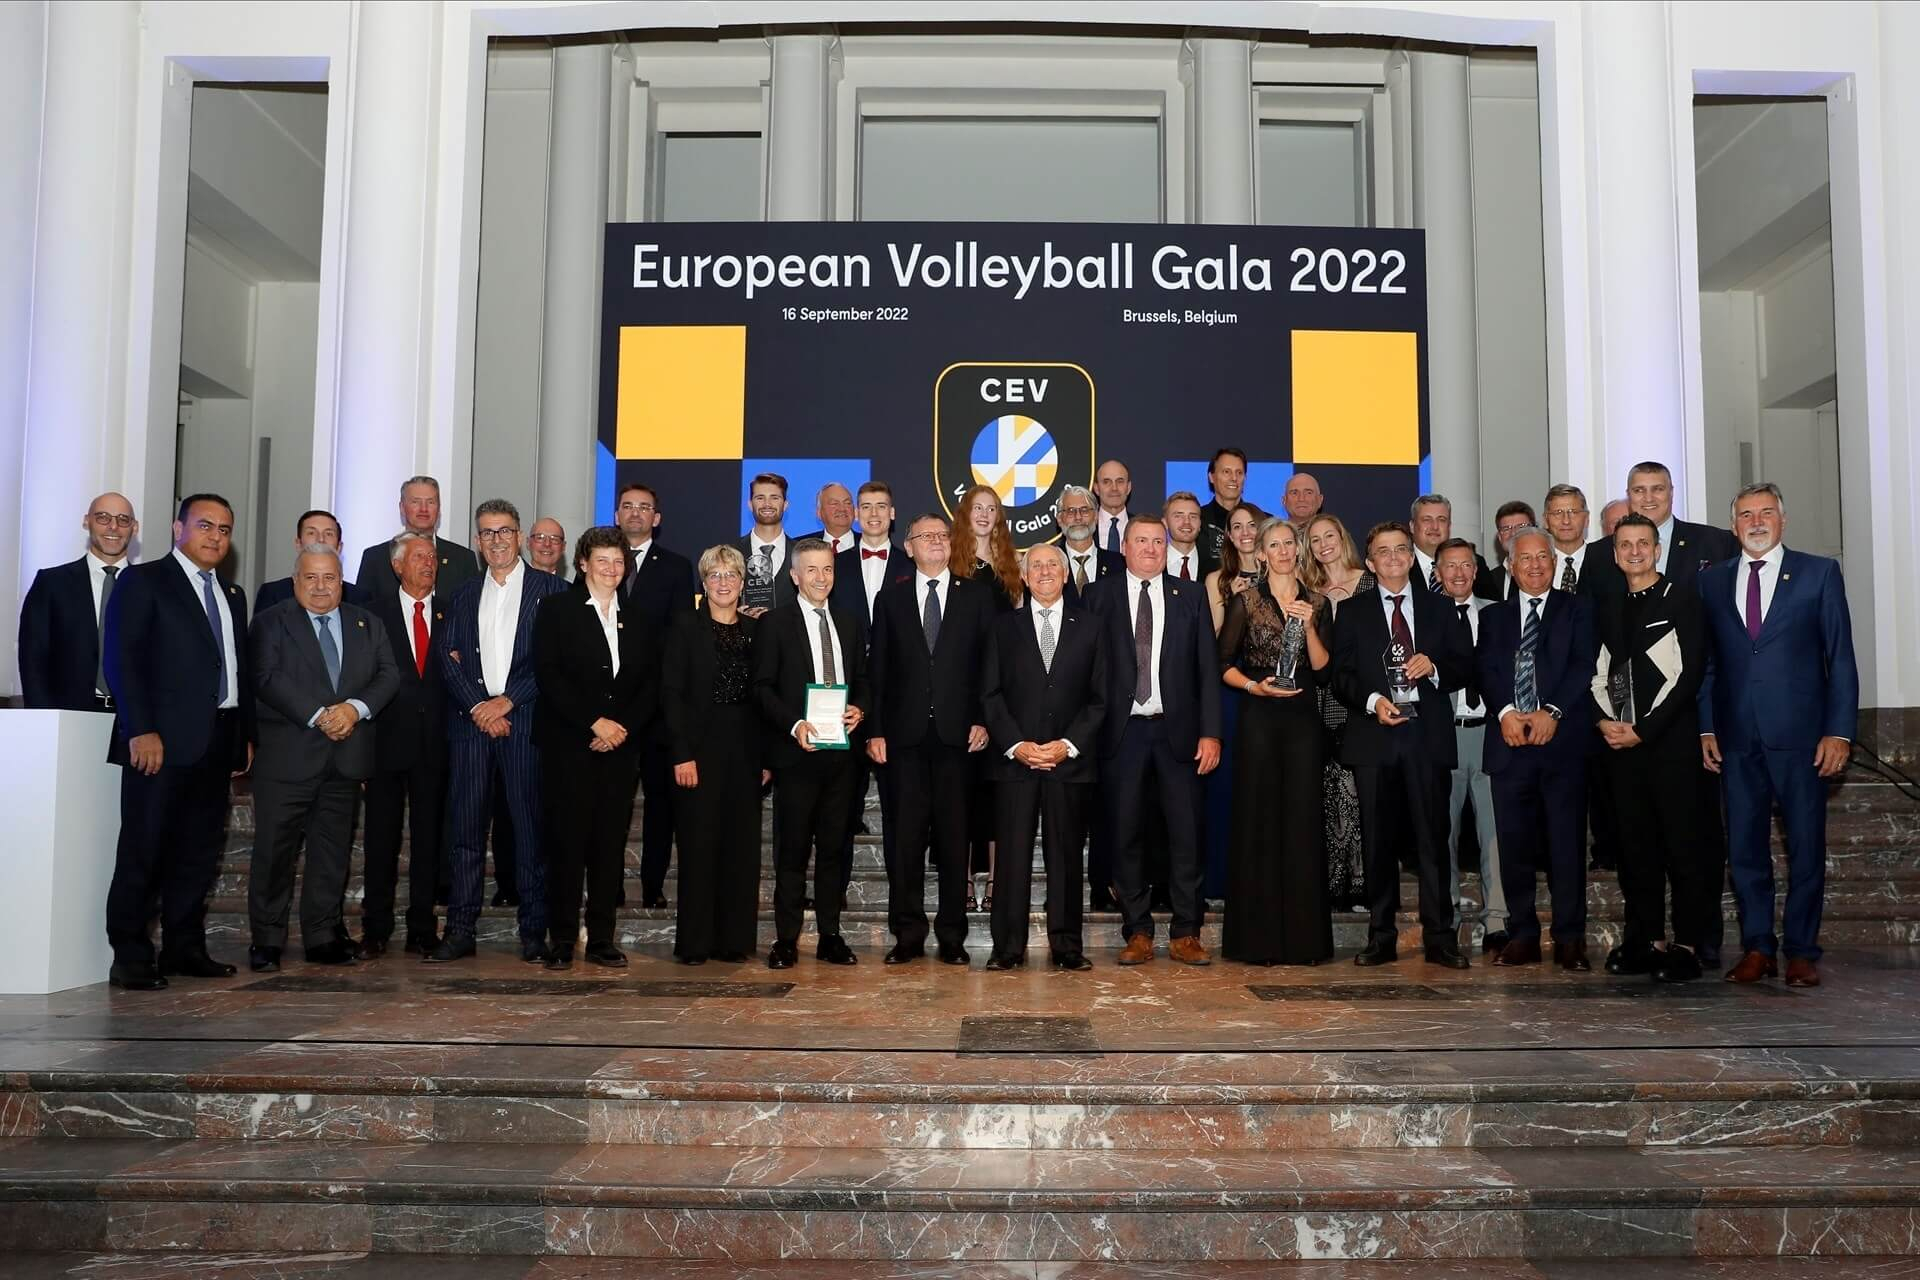 Family picture of the award winners: The who's who of the industry gathered on the stage of the CEV Volleyball Gala in Brussels.